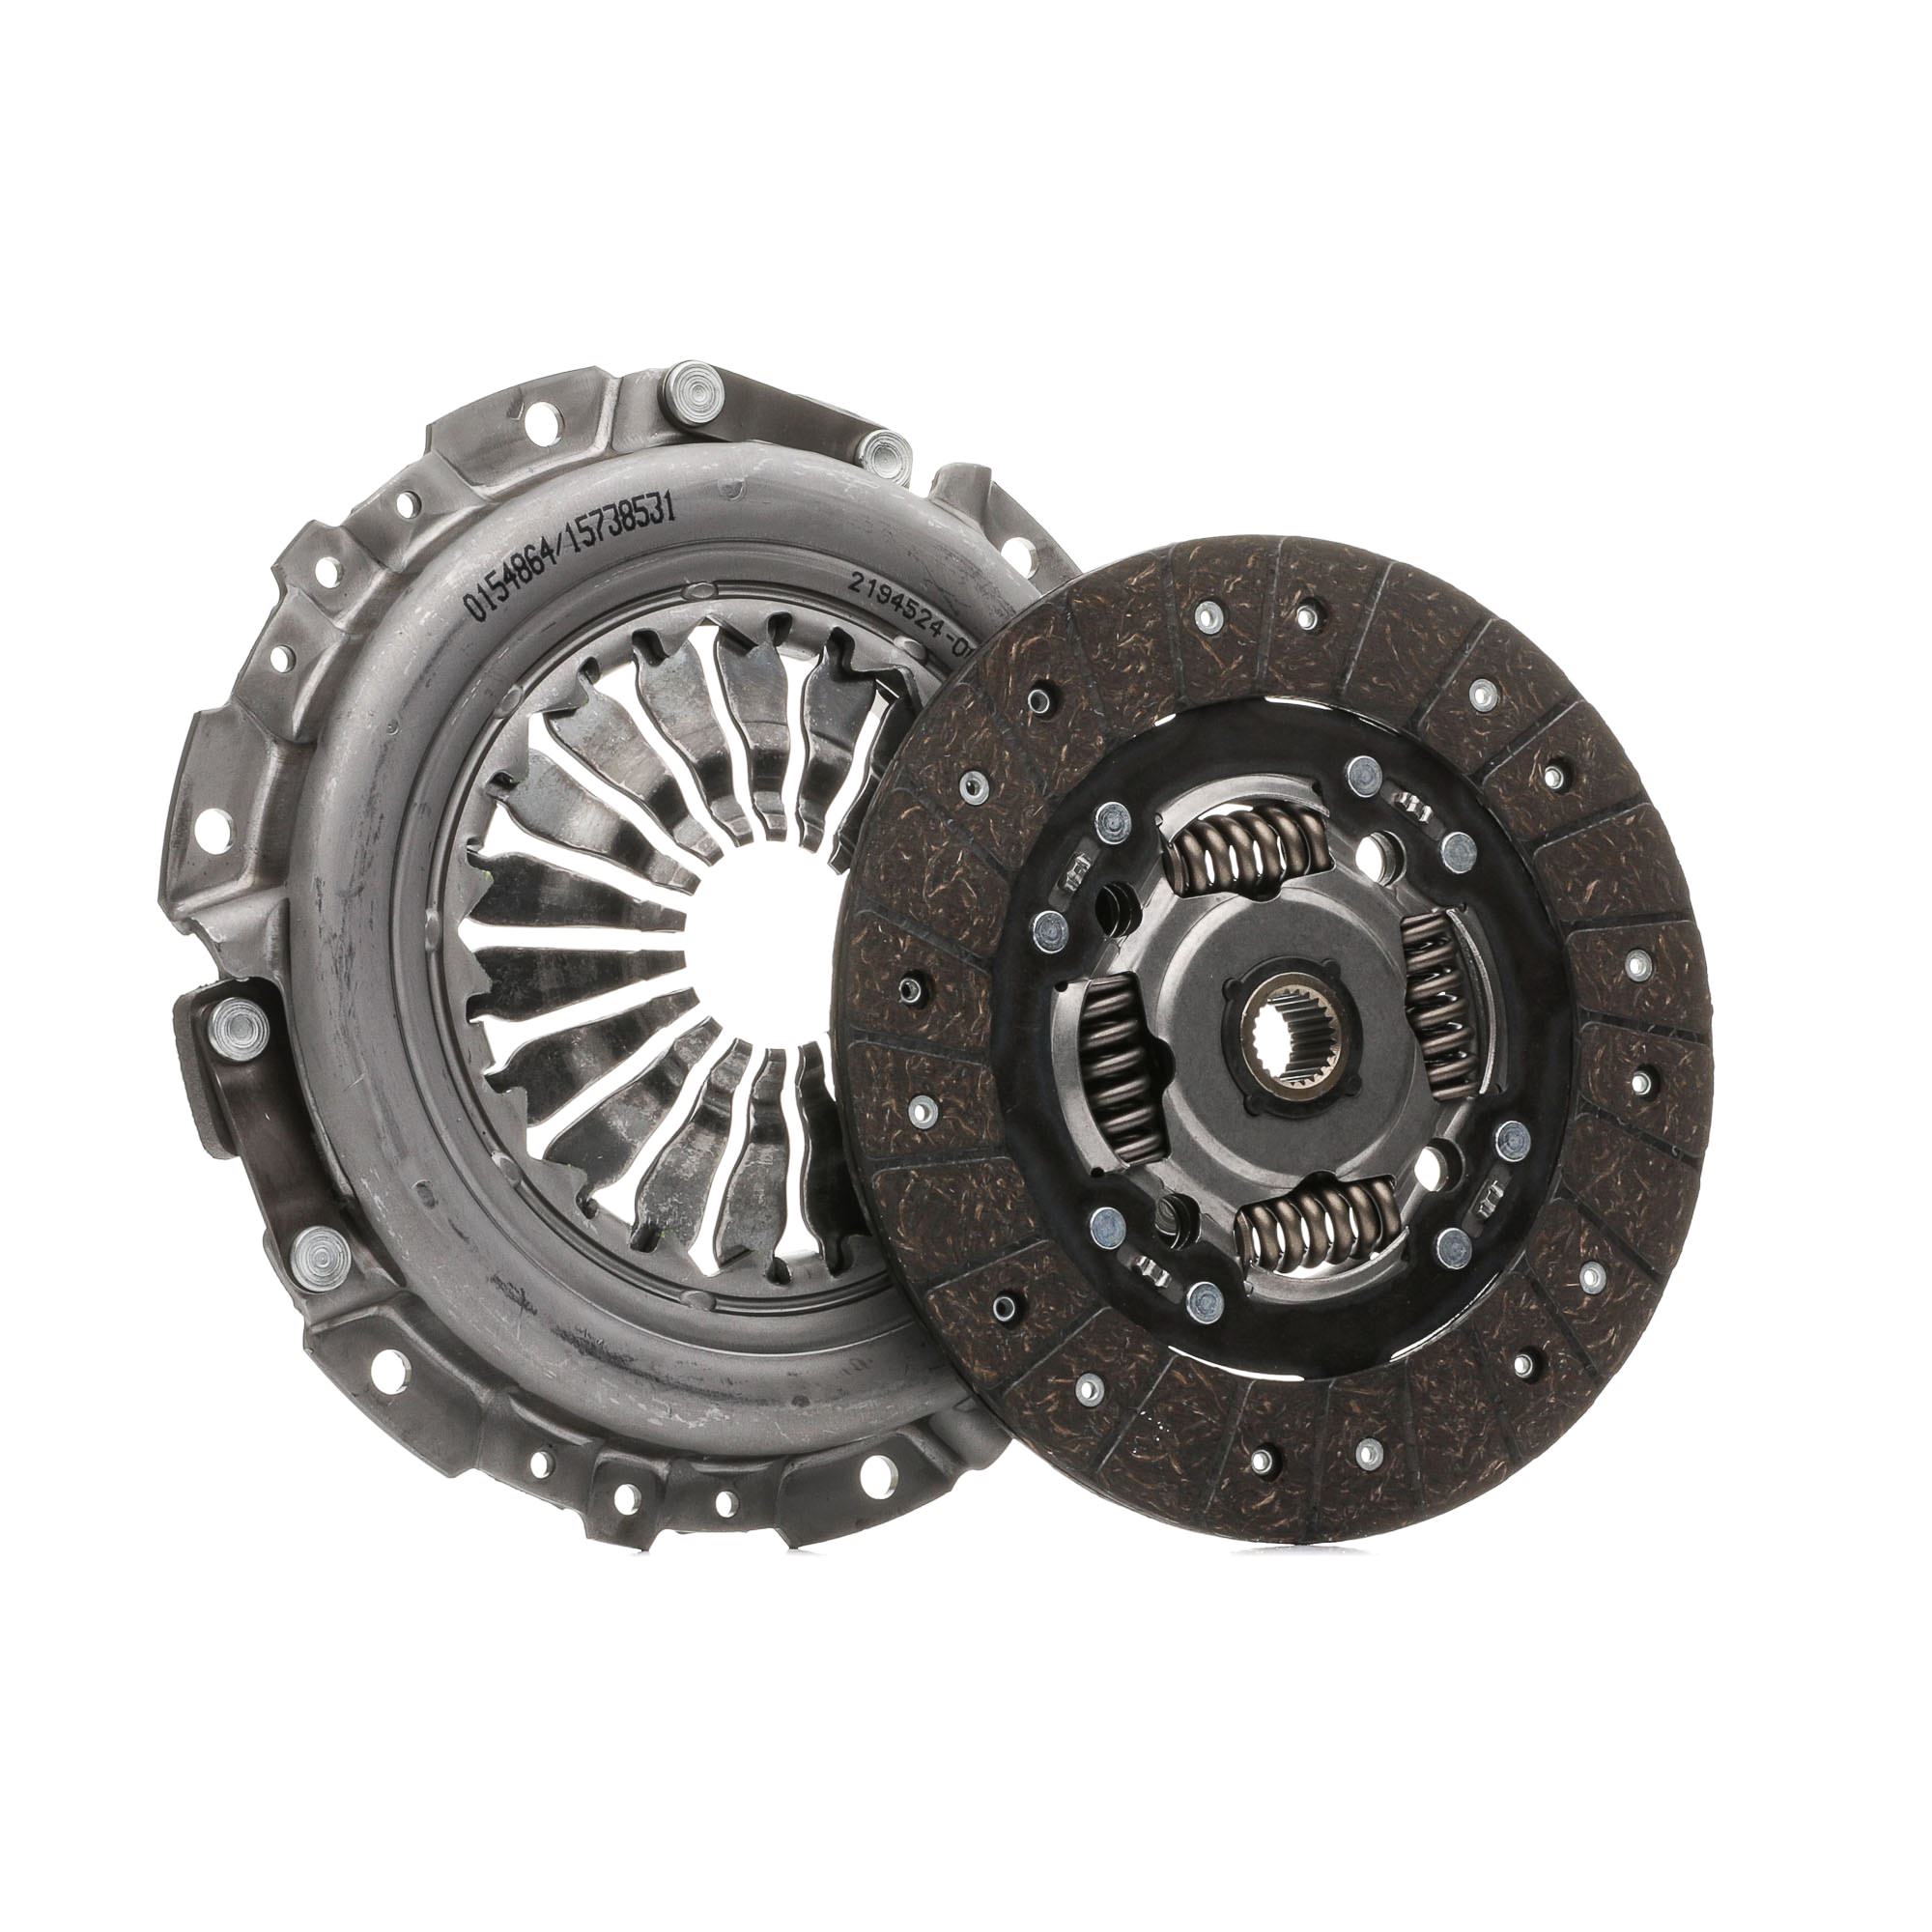 STARK SKCK-0100830 Clutch kit MERCEDES-BENZ experience and price